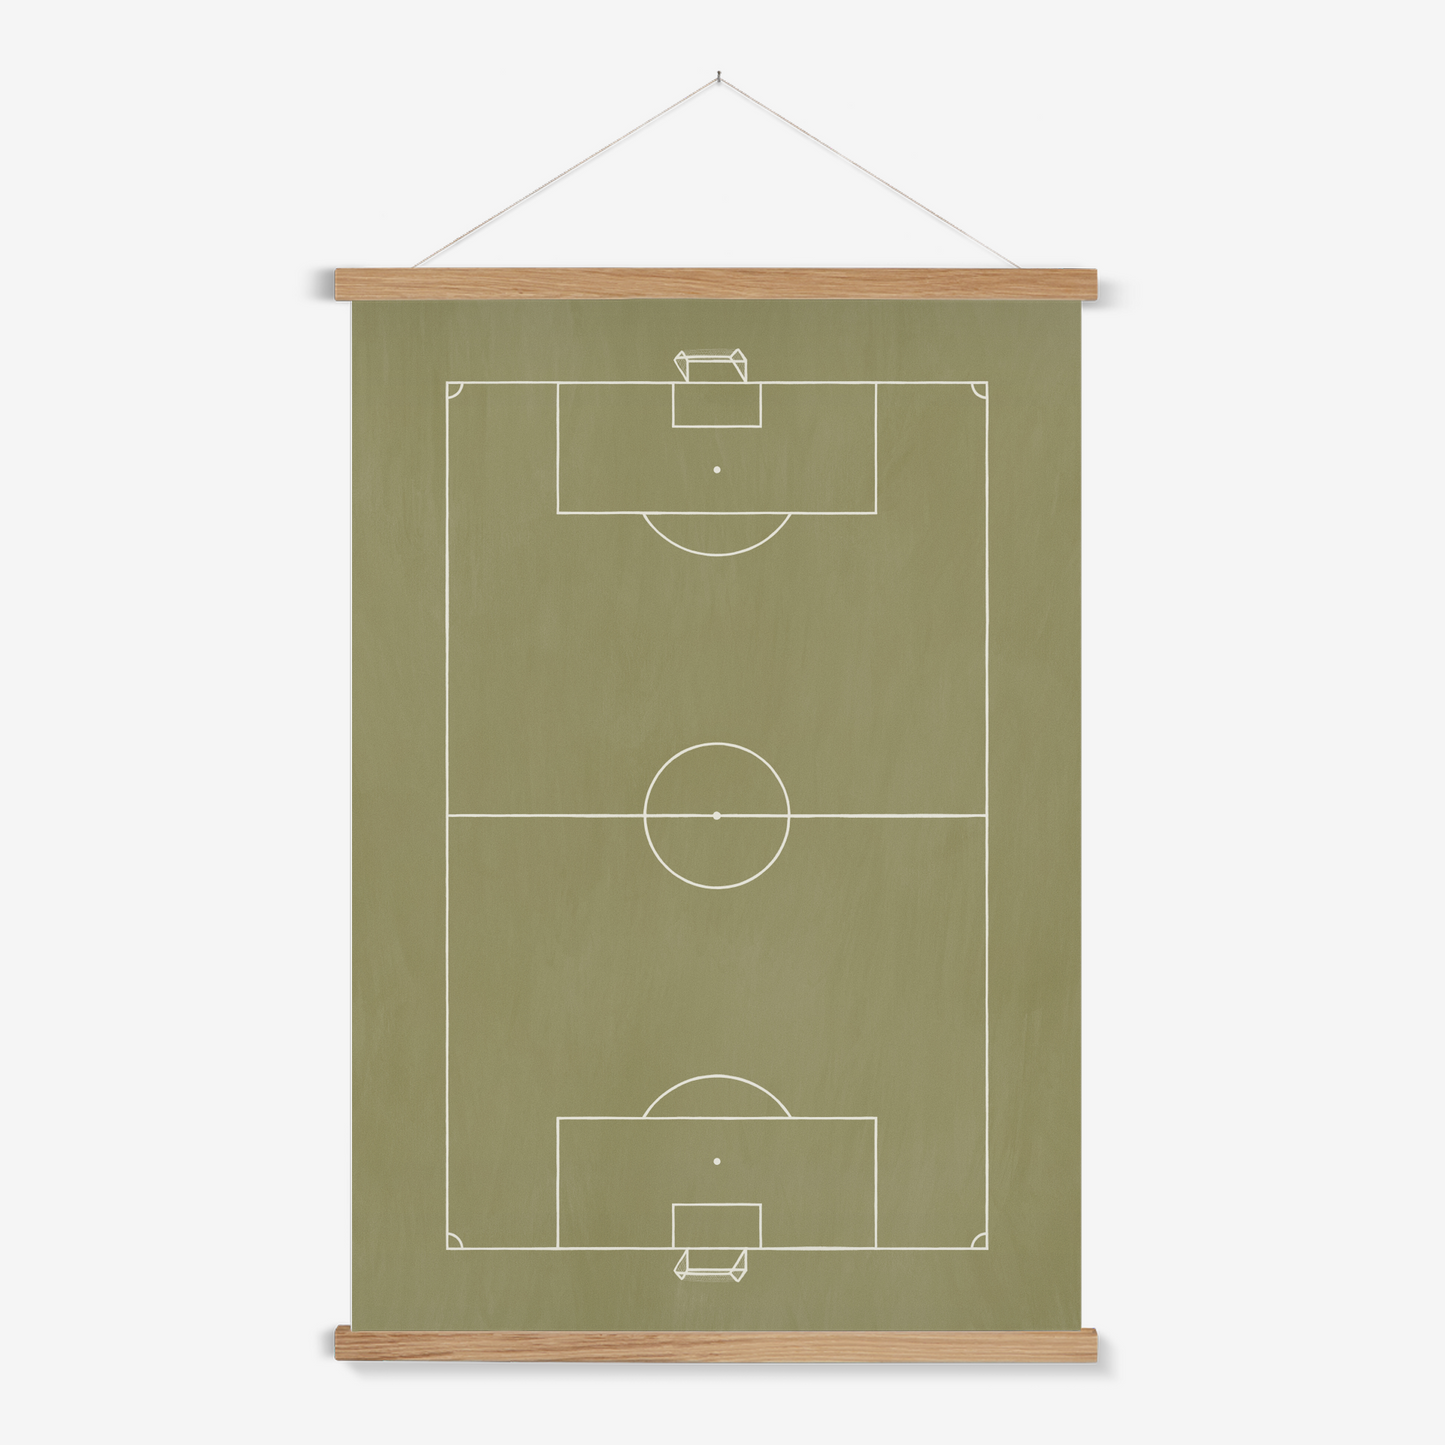 Football pitch in green / Print with Hanger